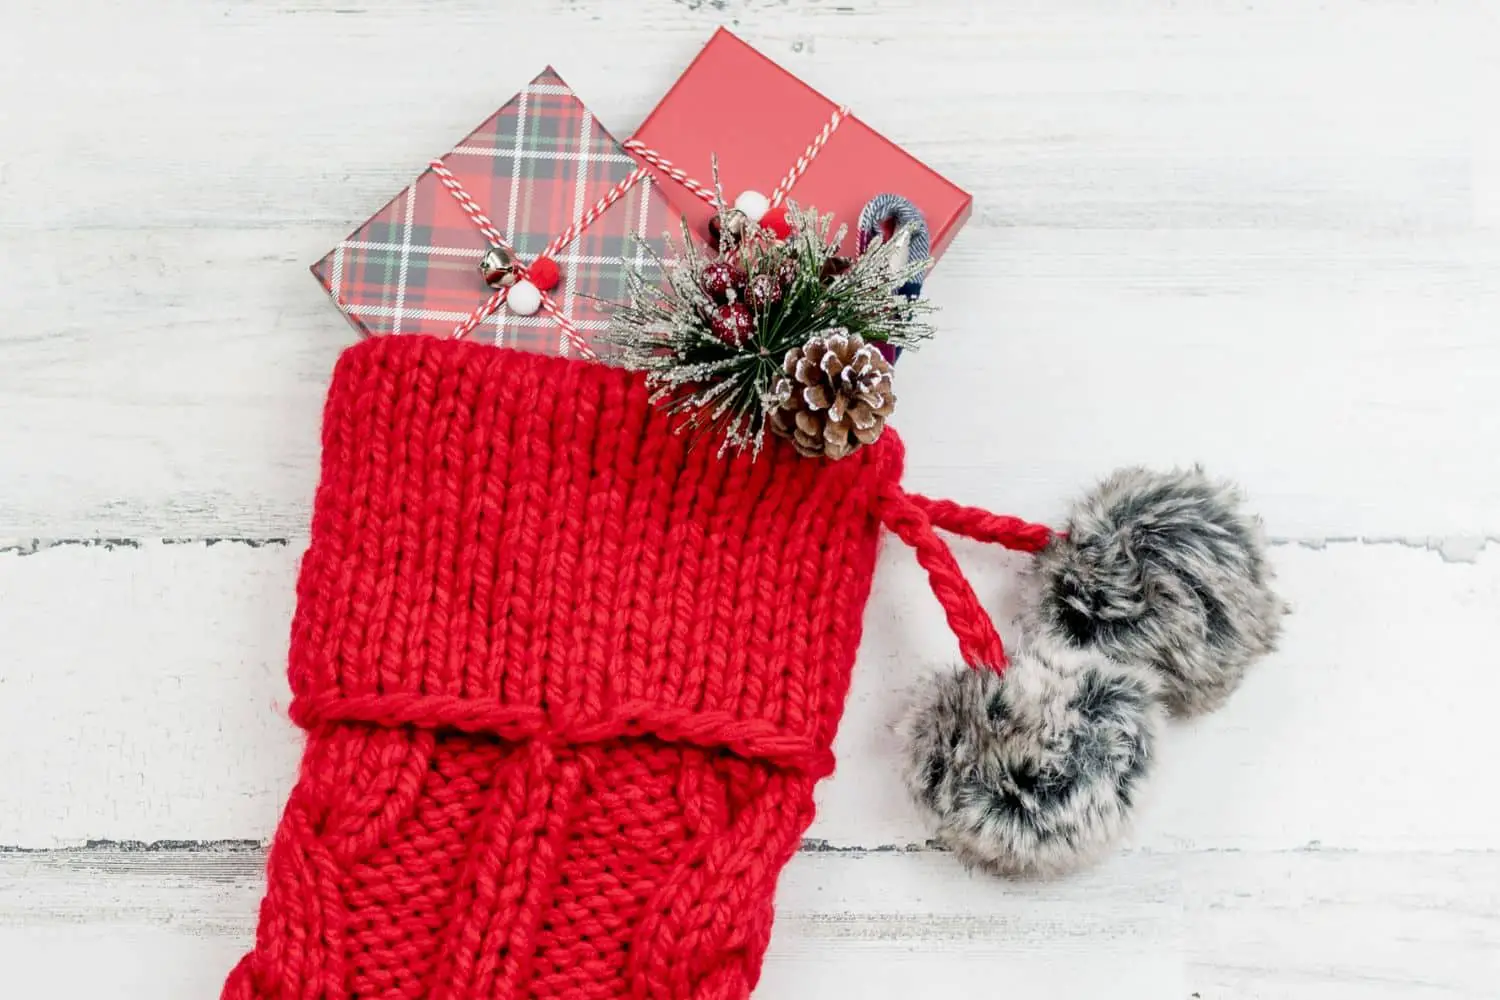 60+ Stocking Stuffer Ideas for Women They Will Absolutely Love